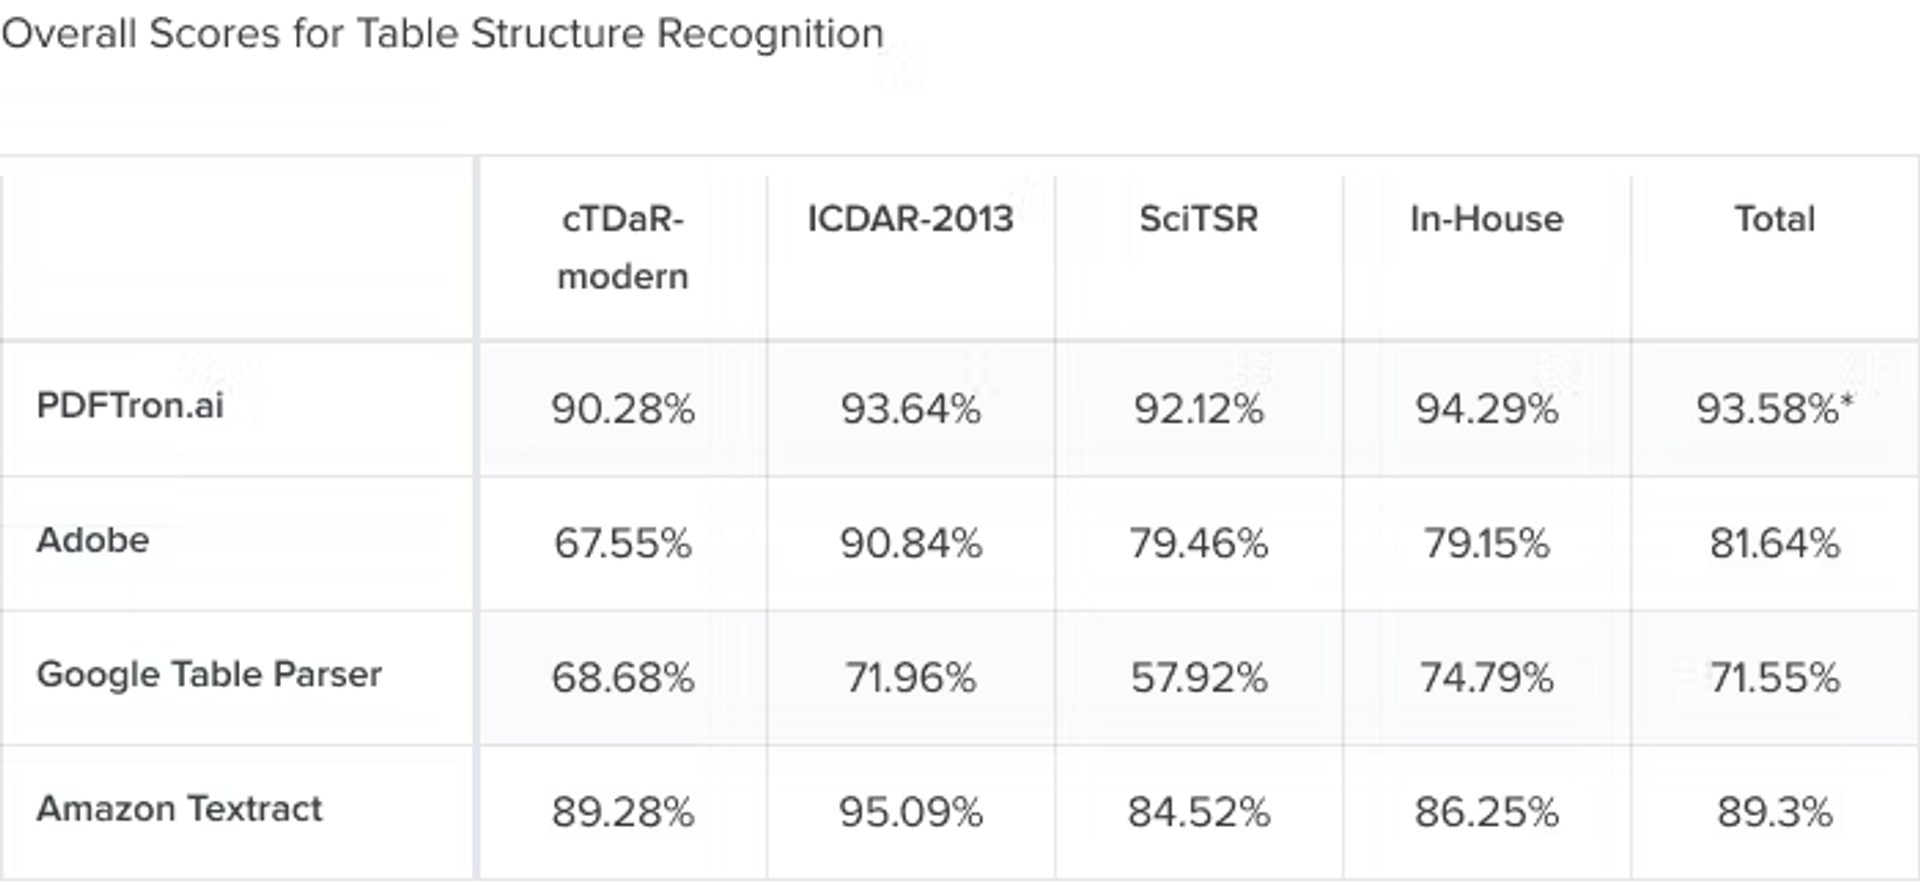 Overall Scores for Table Structure Recognition